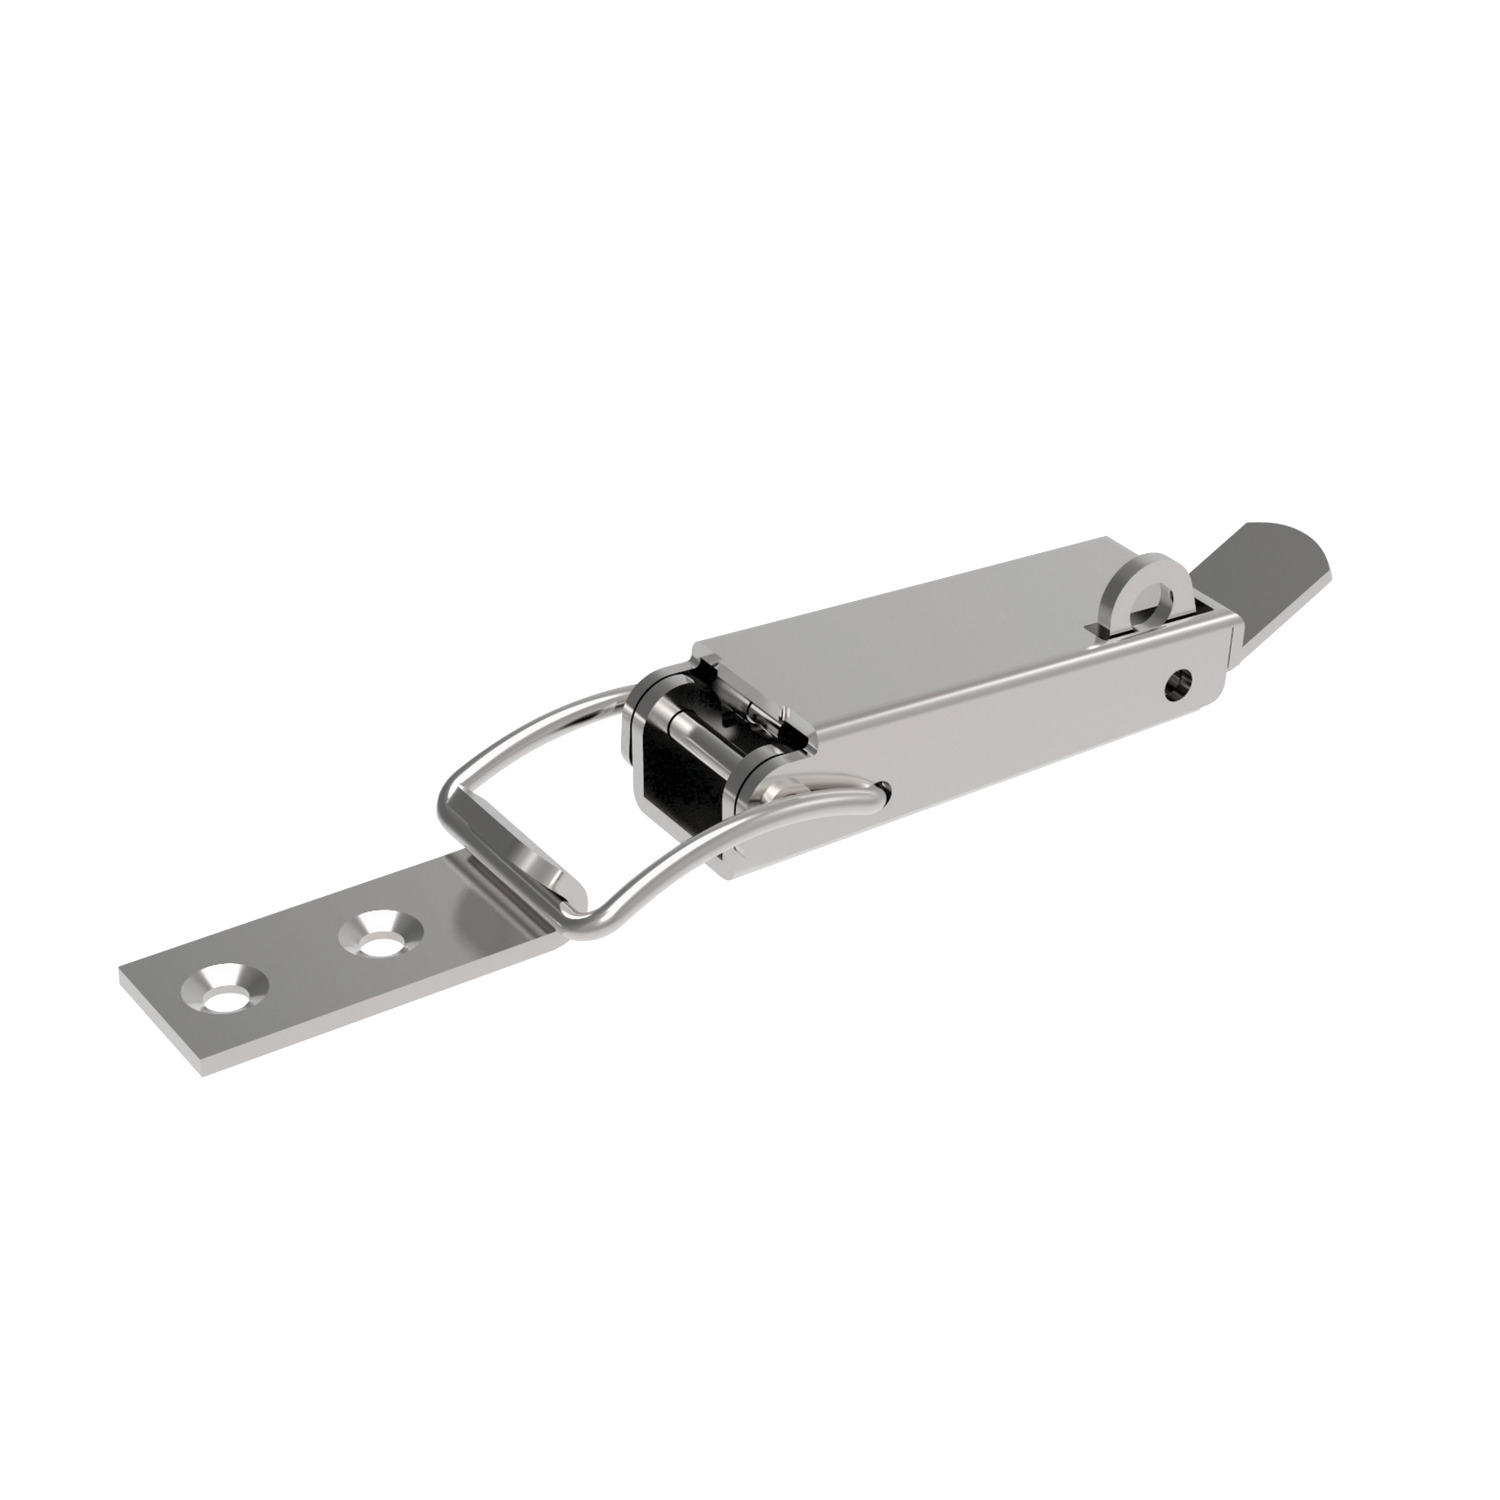 J0460.AC0030 Toggle Latches Stainless Steel - 102 - 11 - 23